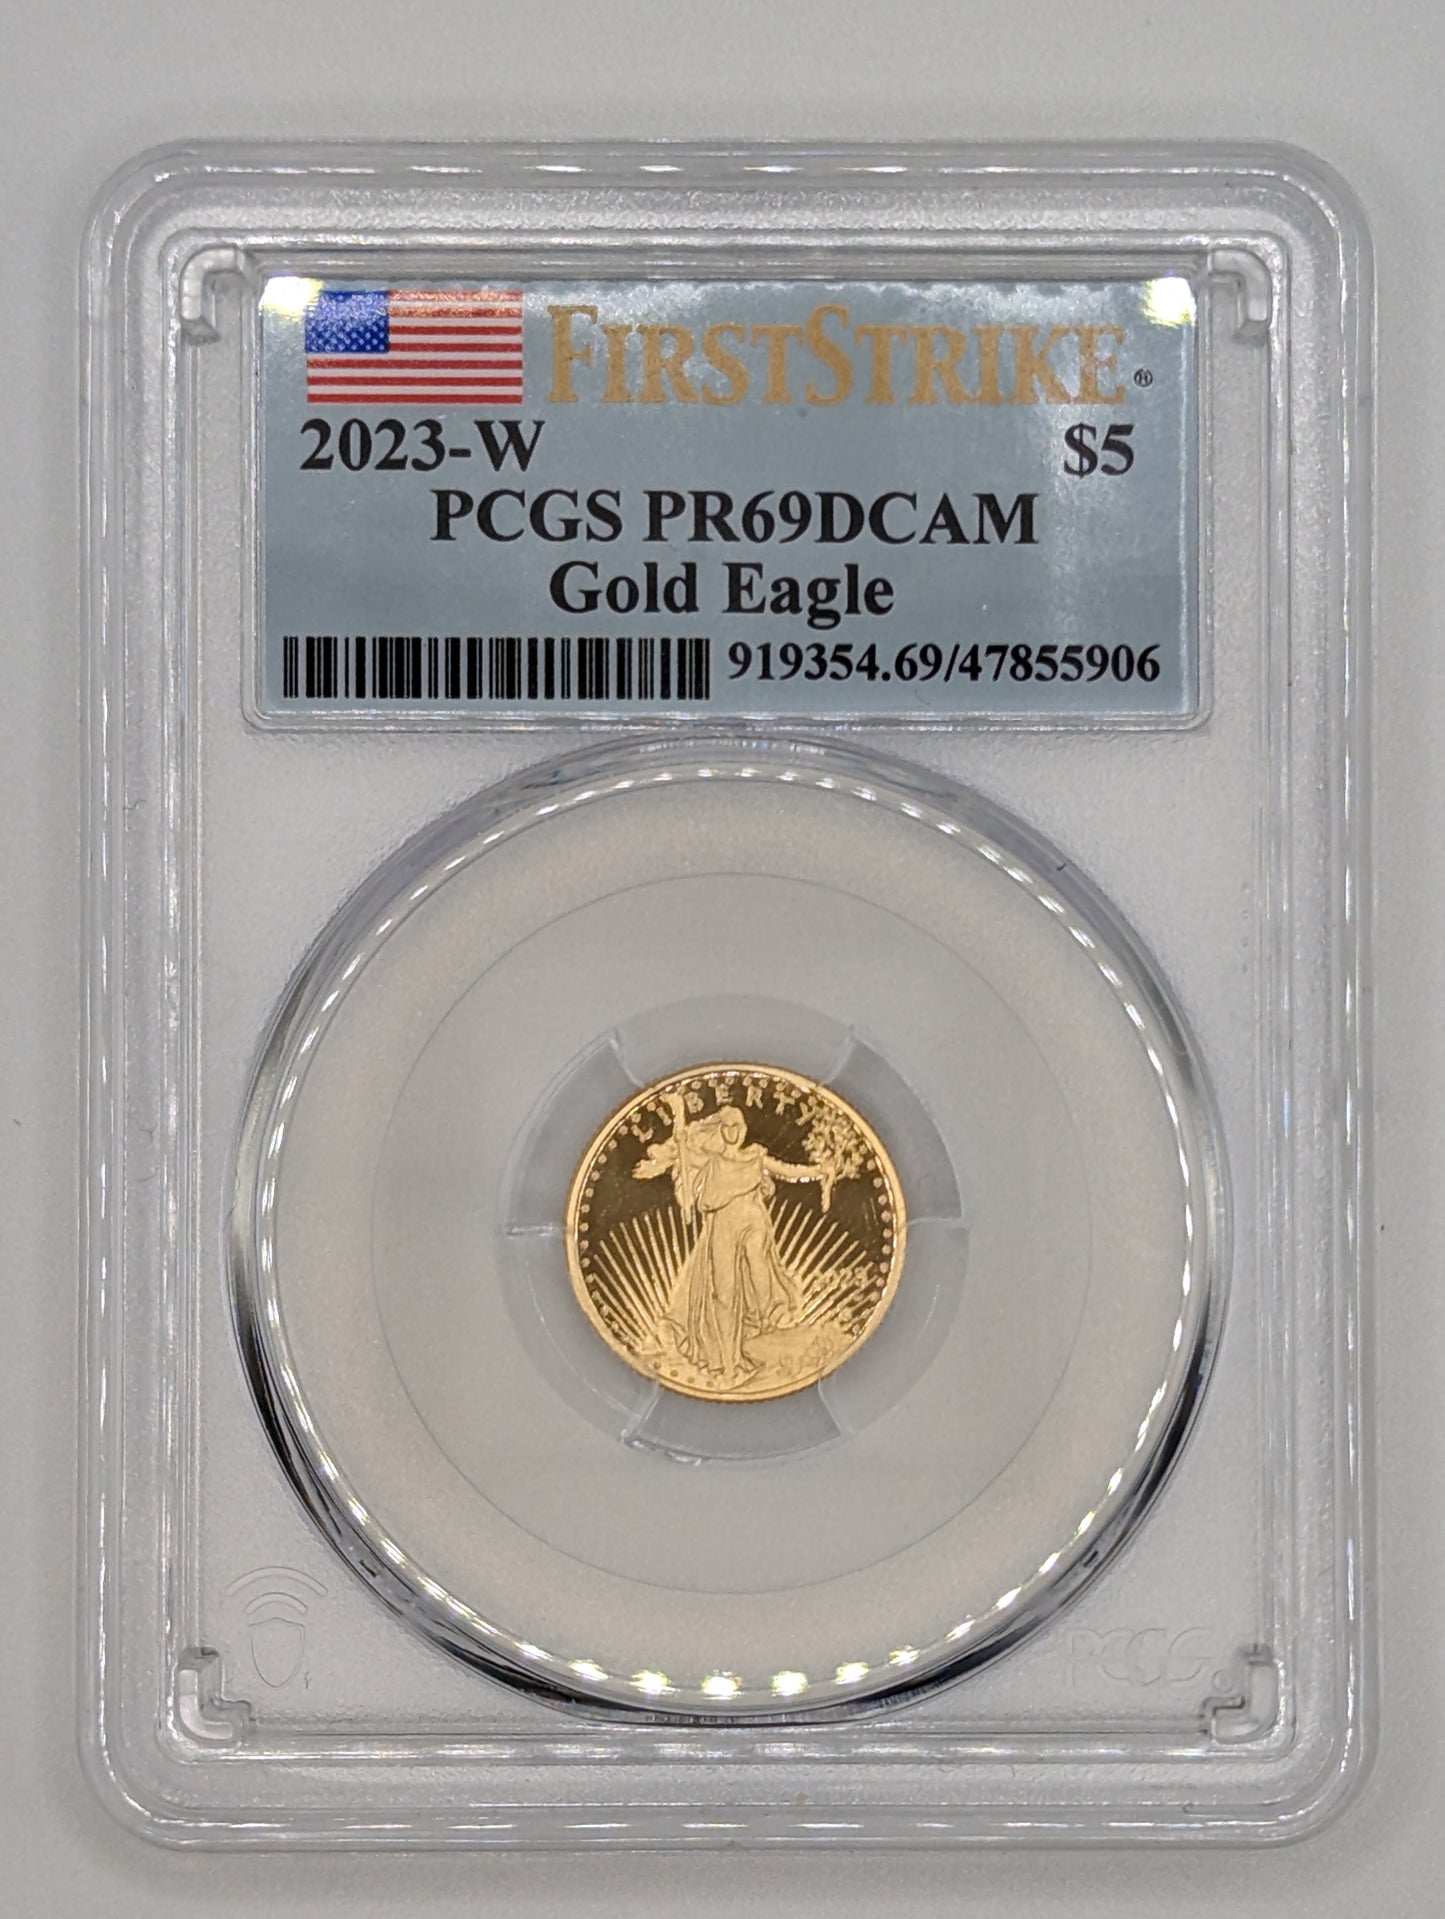 2023-W American Eagle Gold Proof 1/10 oz. Coin - PR69DCAM